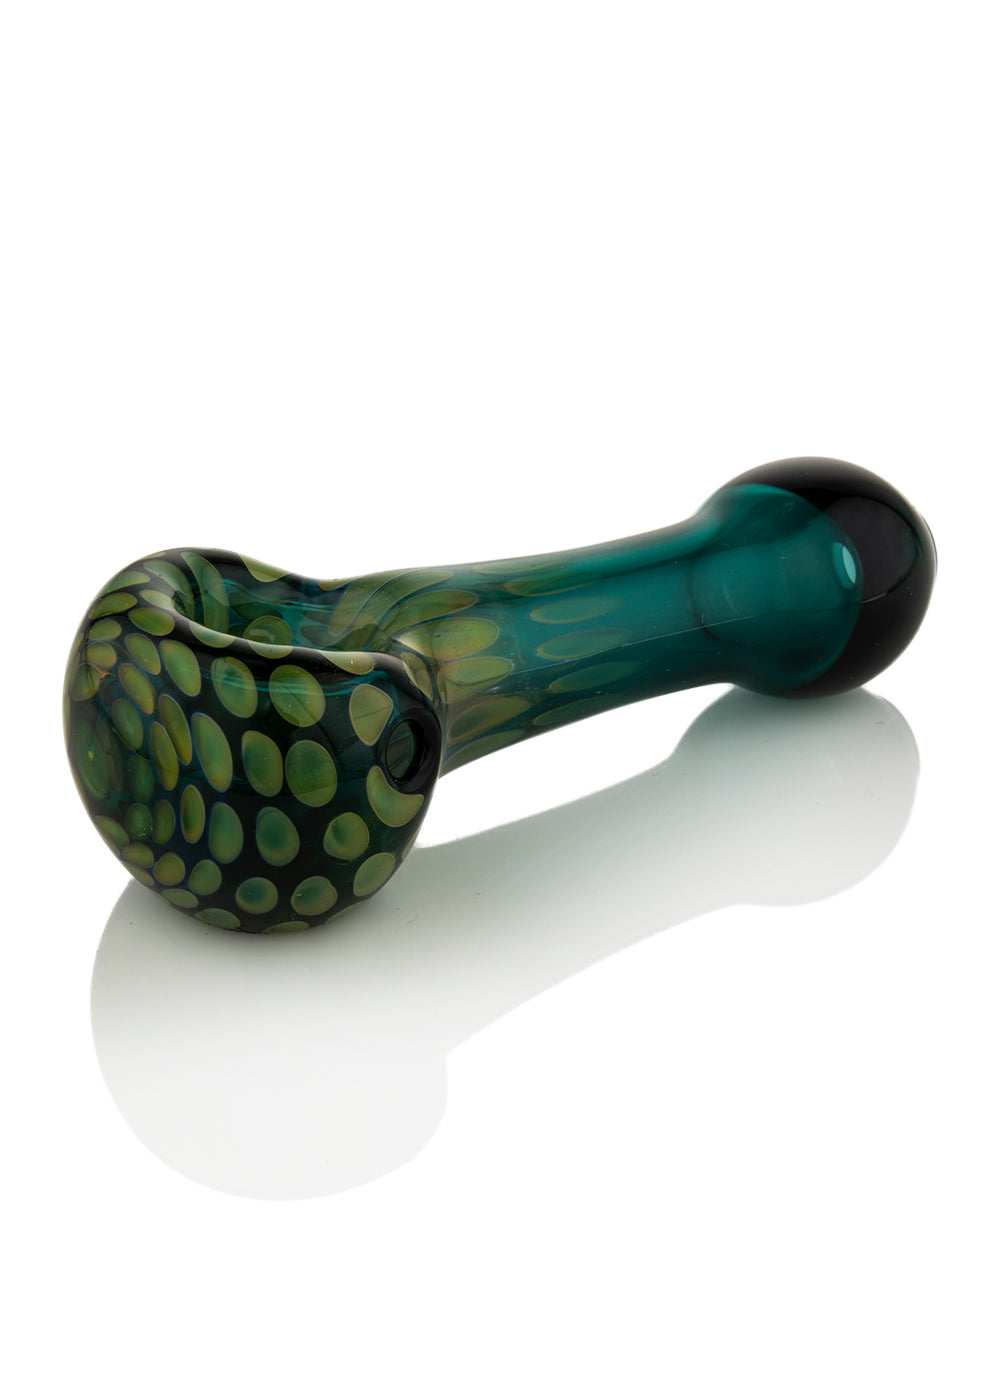 CURTIS Teal Honeycomb Fume Spoon by Curtis Claw